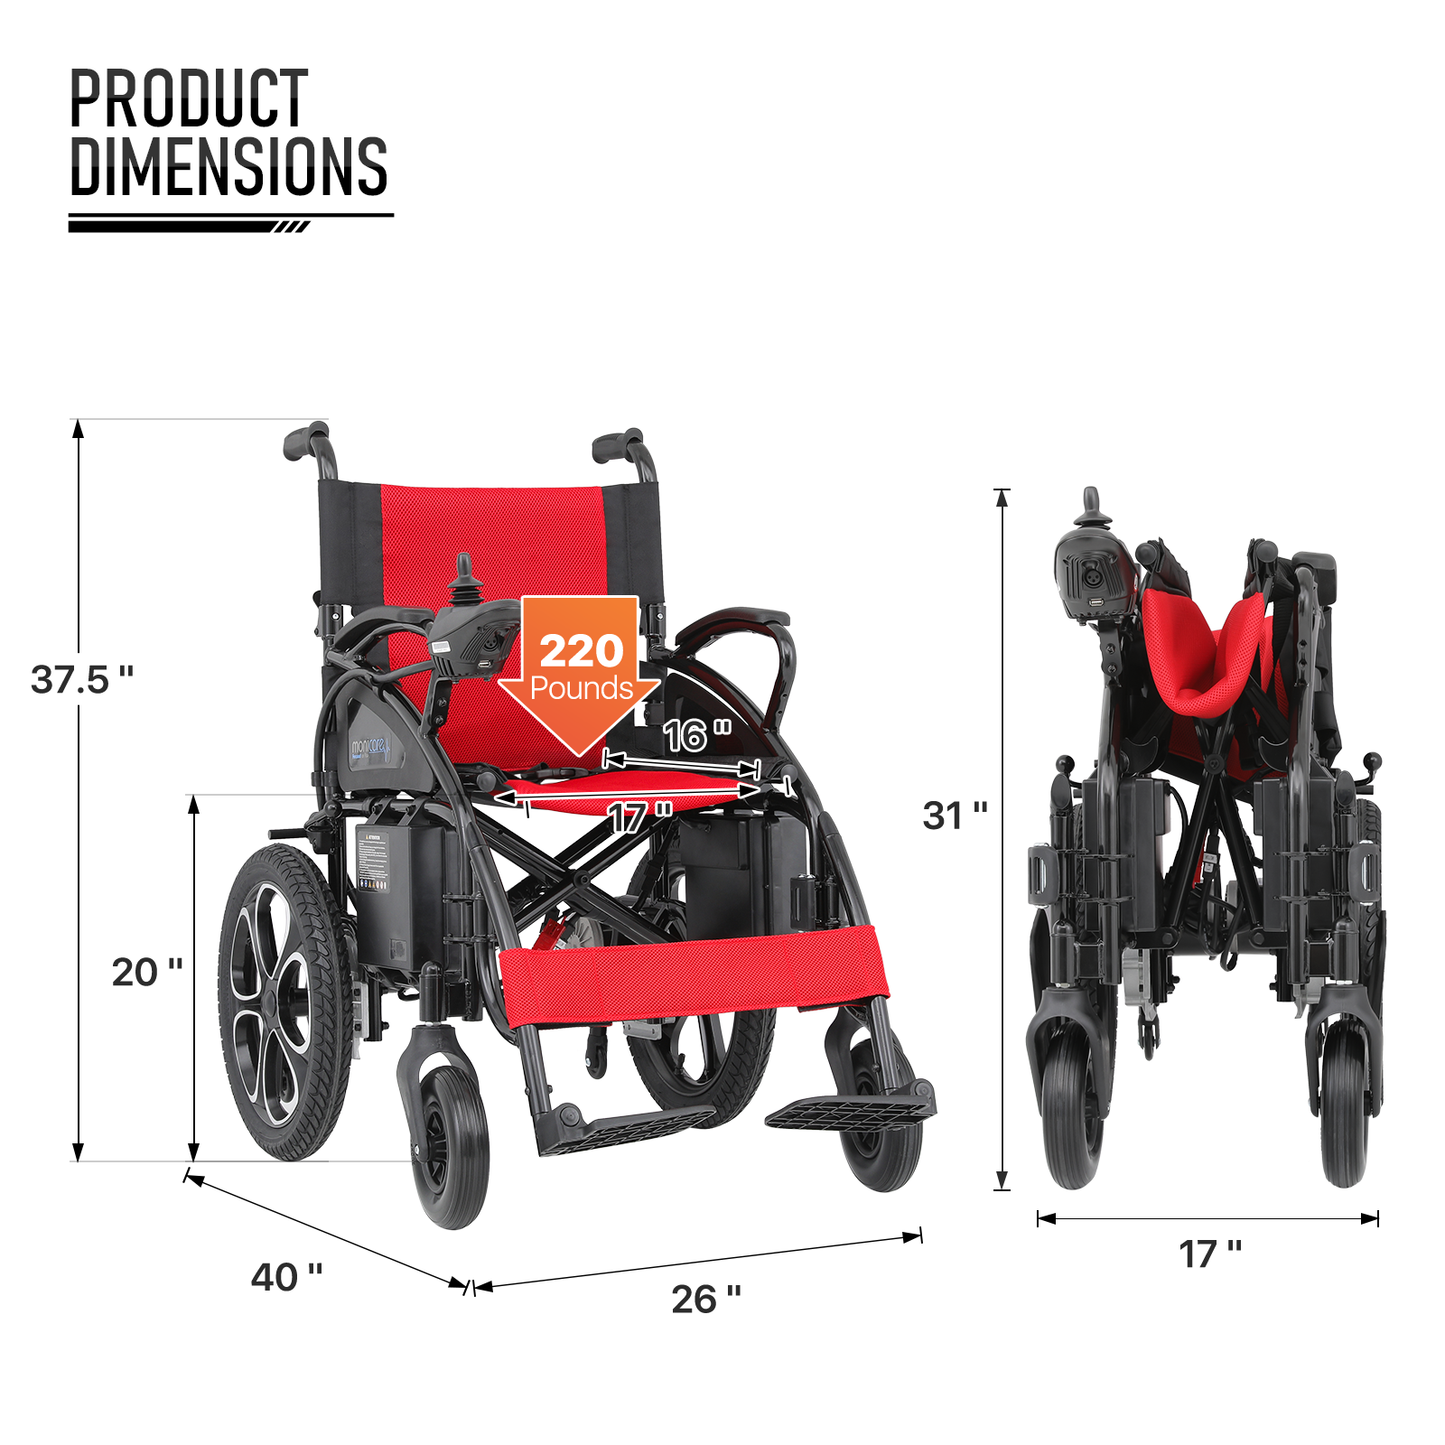 Foldable Electric Wheelchair - 12 Miles of Battery Life - Steel Frame Oxford Seat